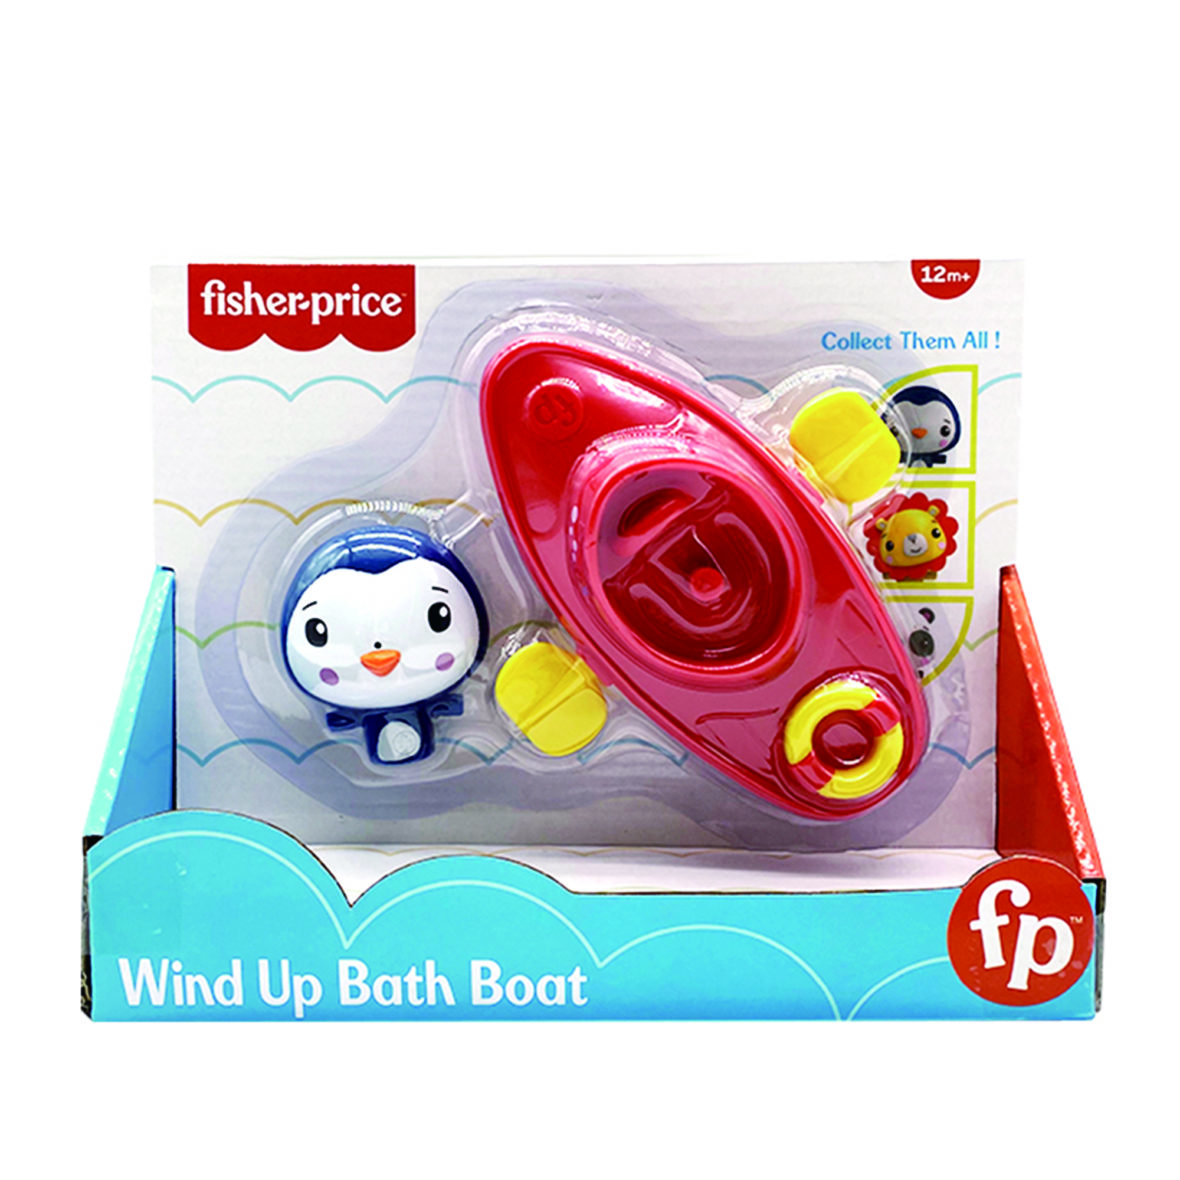 Wind up boat with figure animal-Penguin